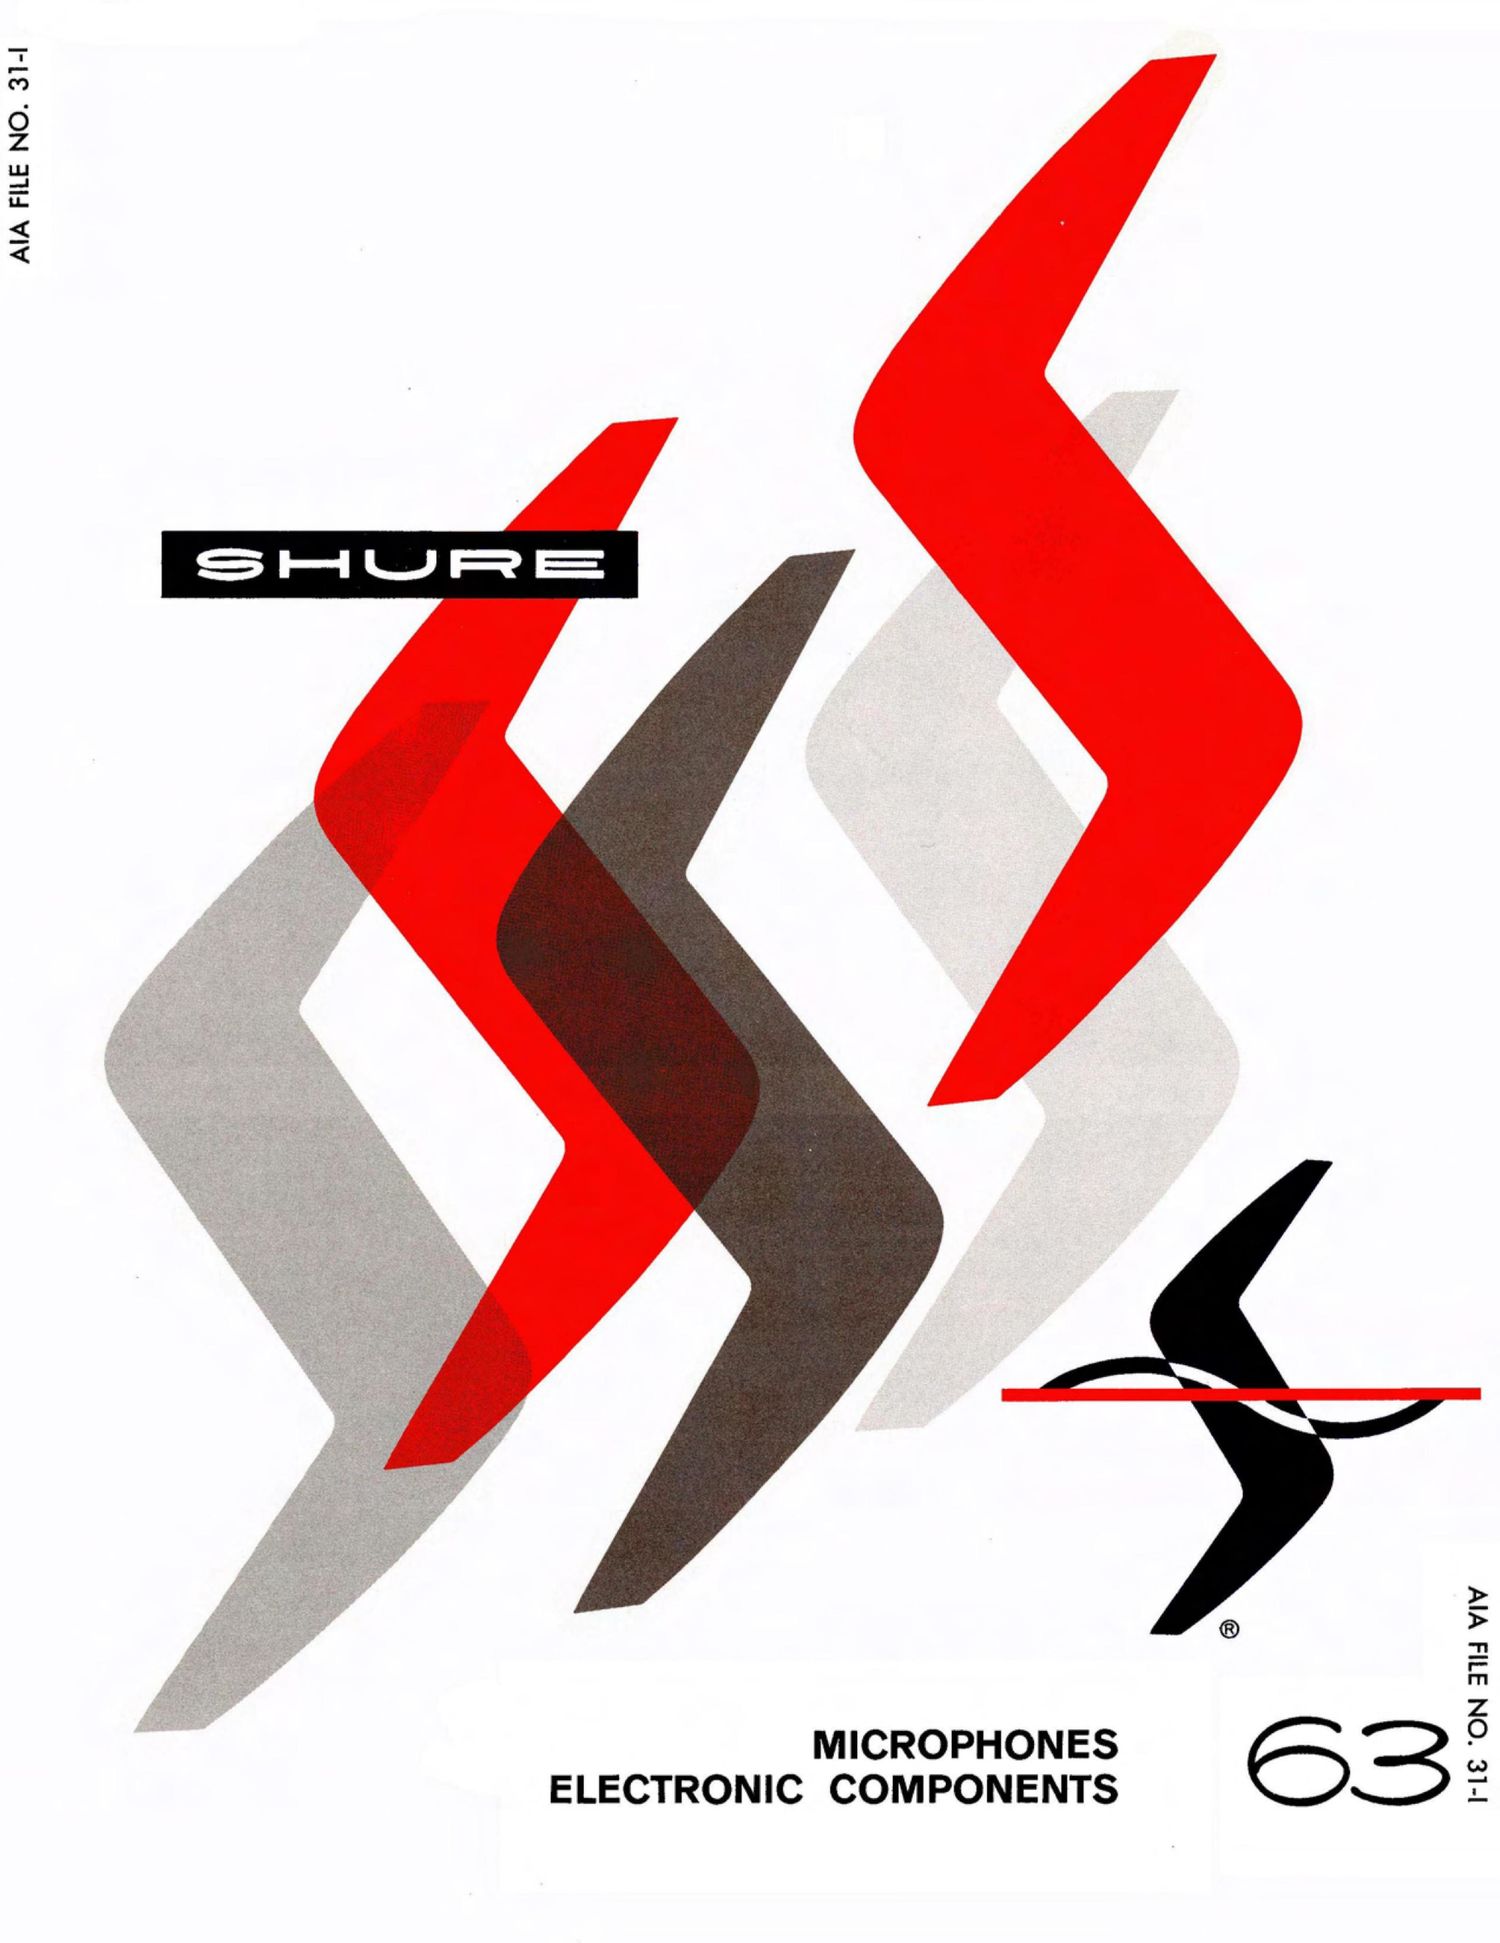 shure 1963 catalogue microphones electronic components